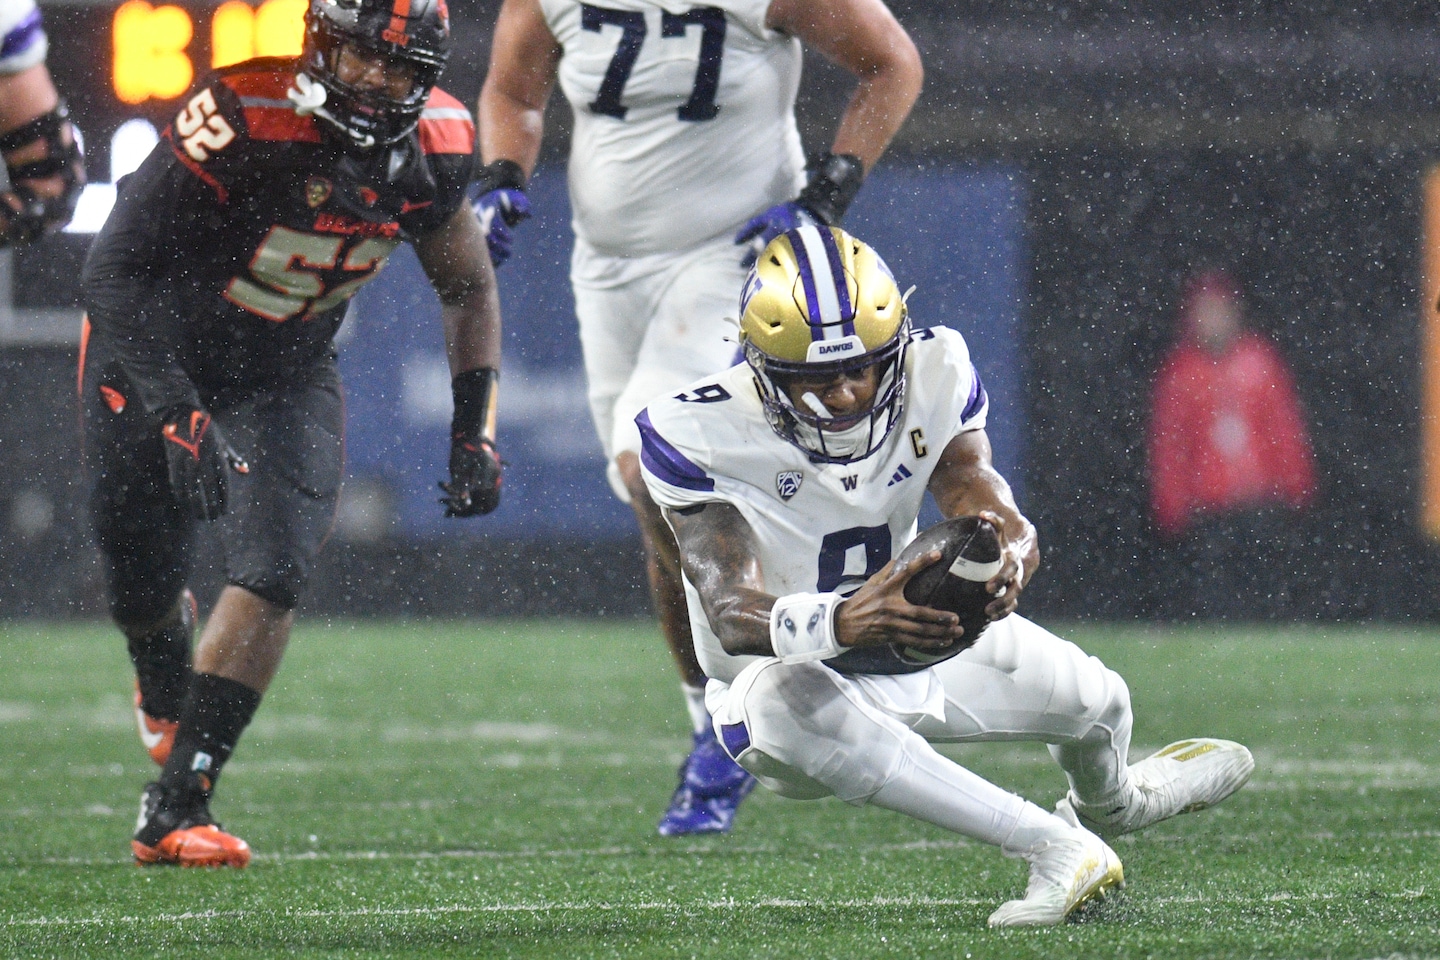 College football winners and losers: Once again, No. 5 Washington finds a way